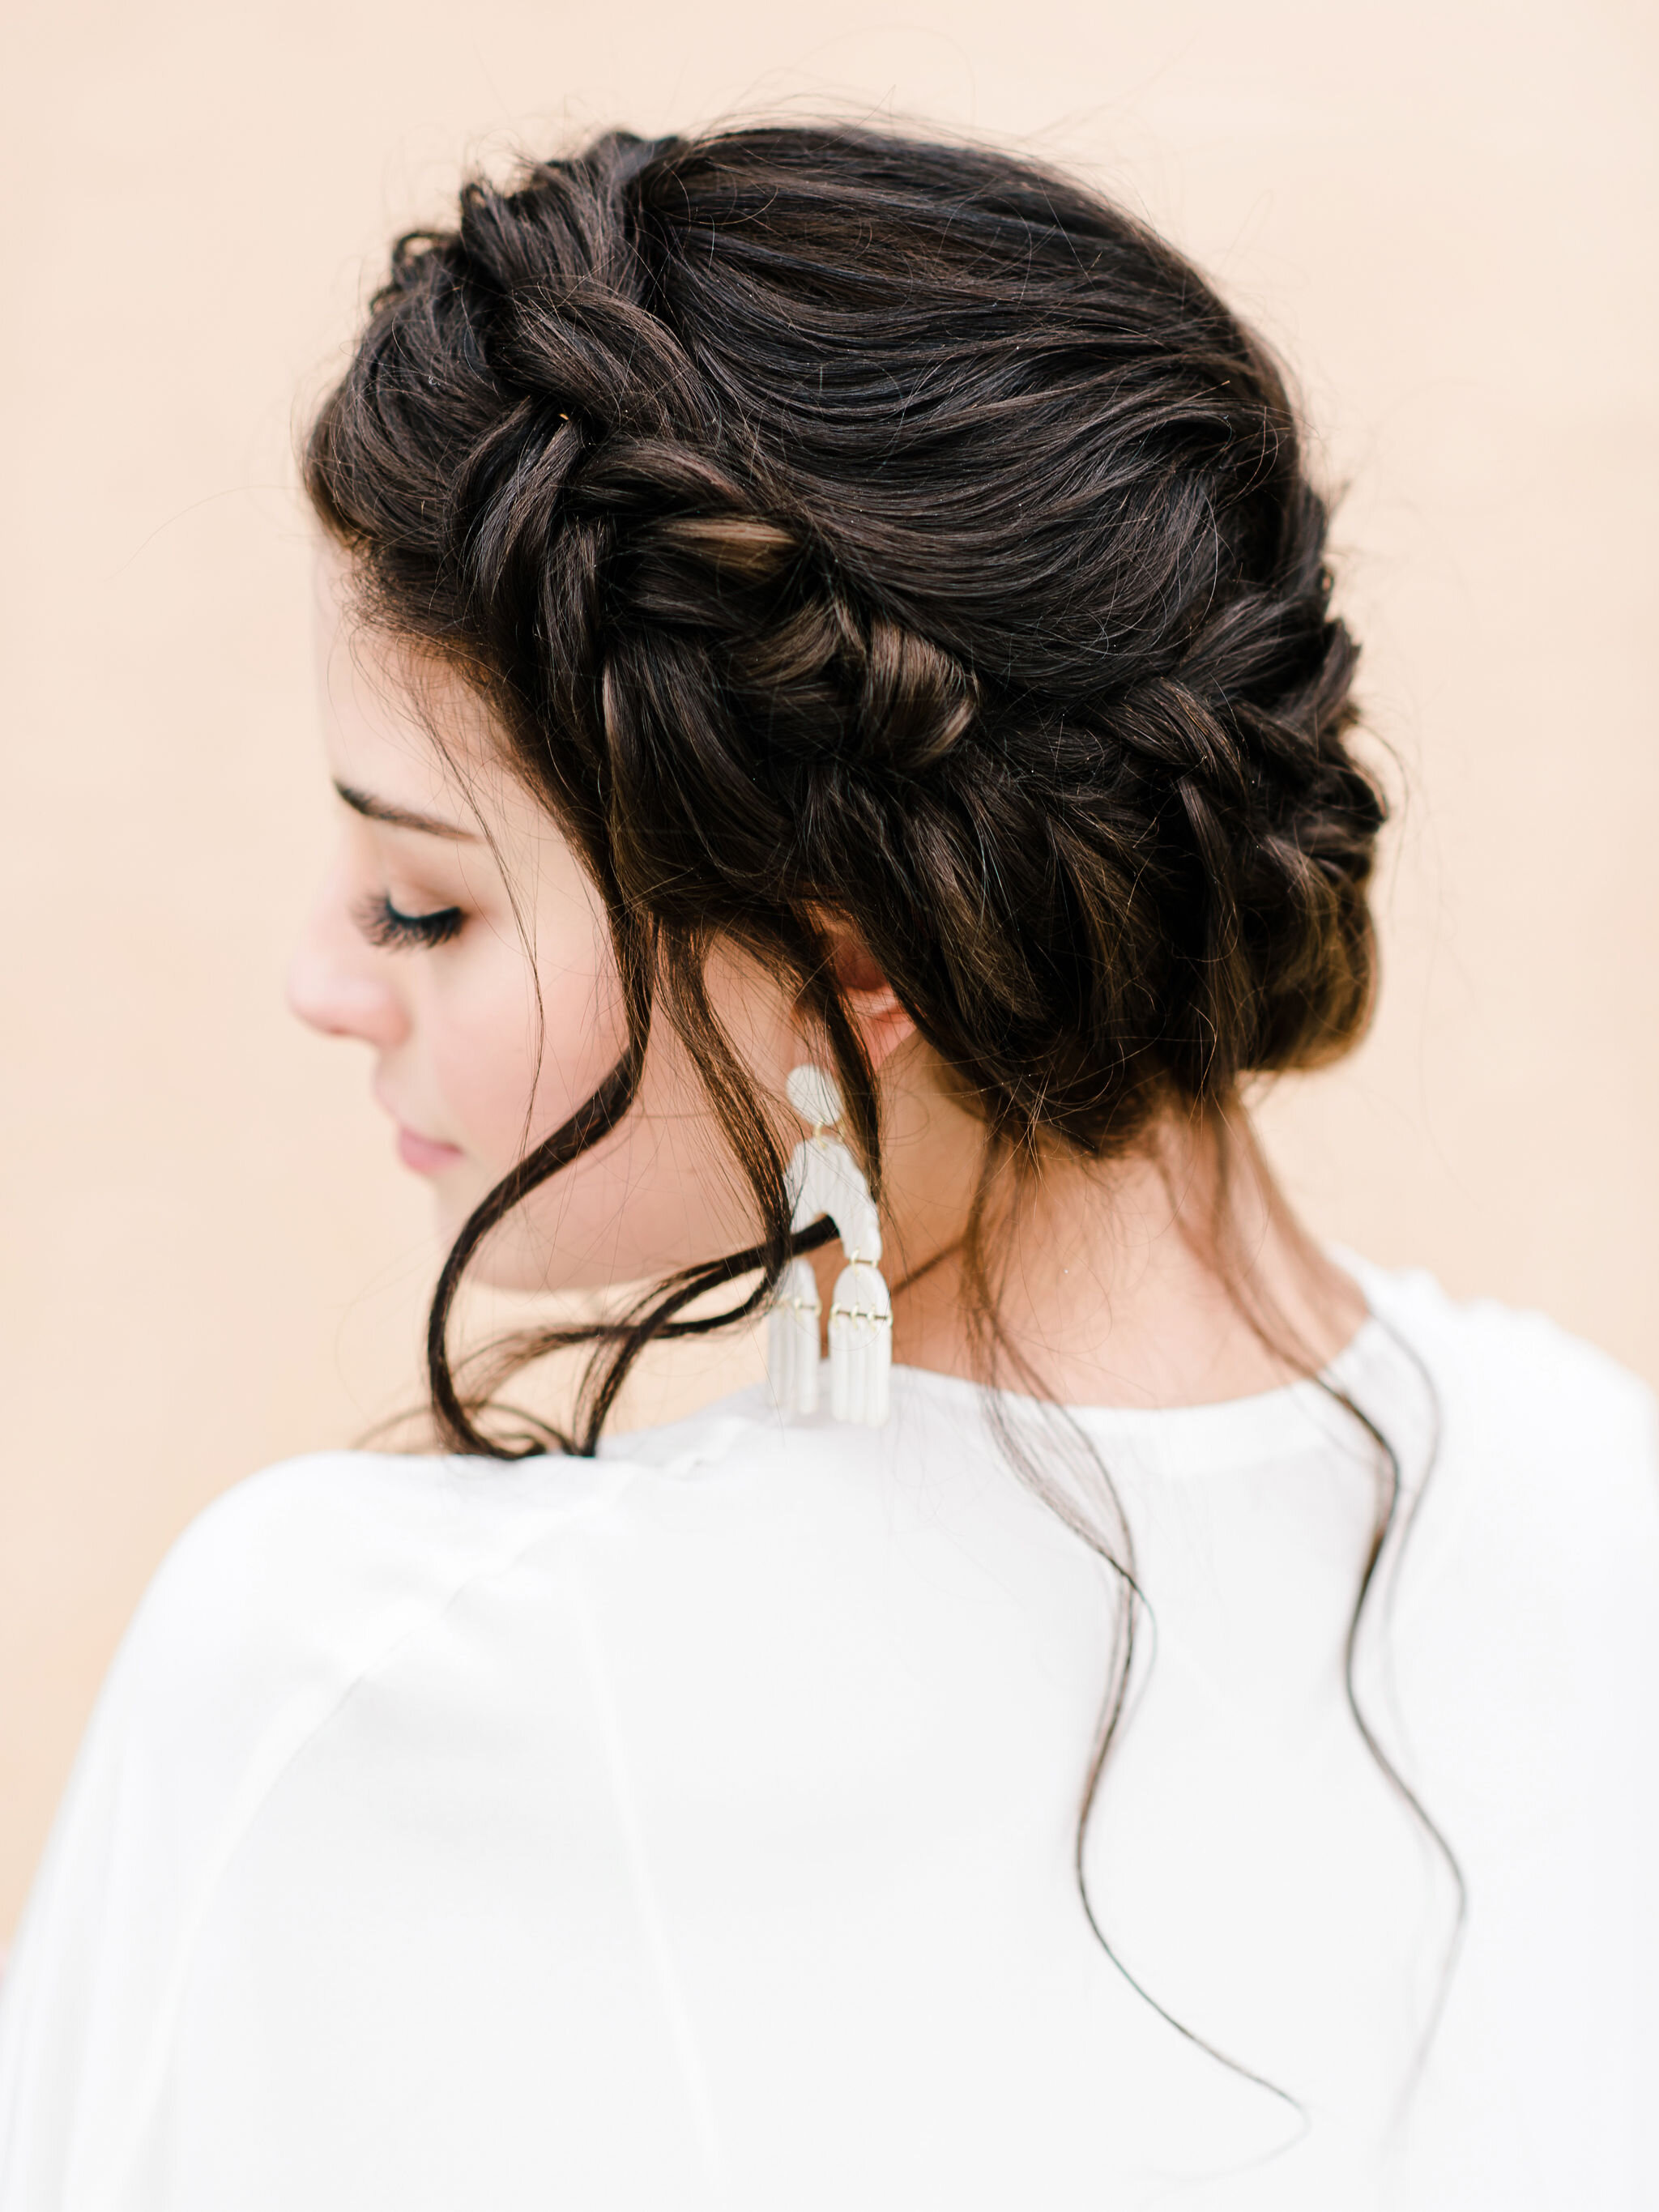 8 Wedding Hairstyles for the Boho Bride // Let's Get Local